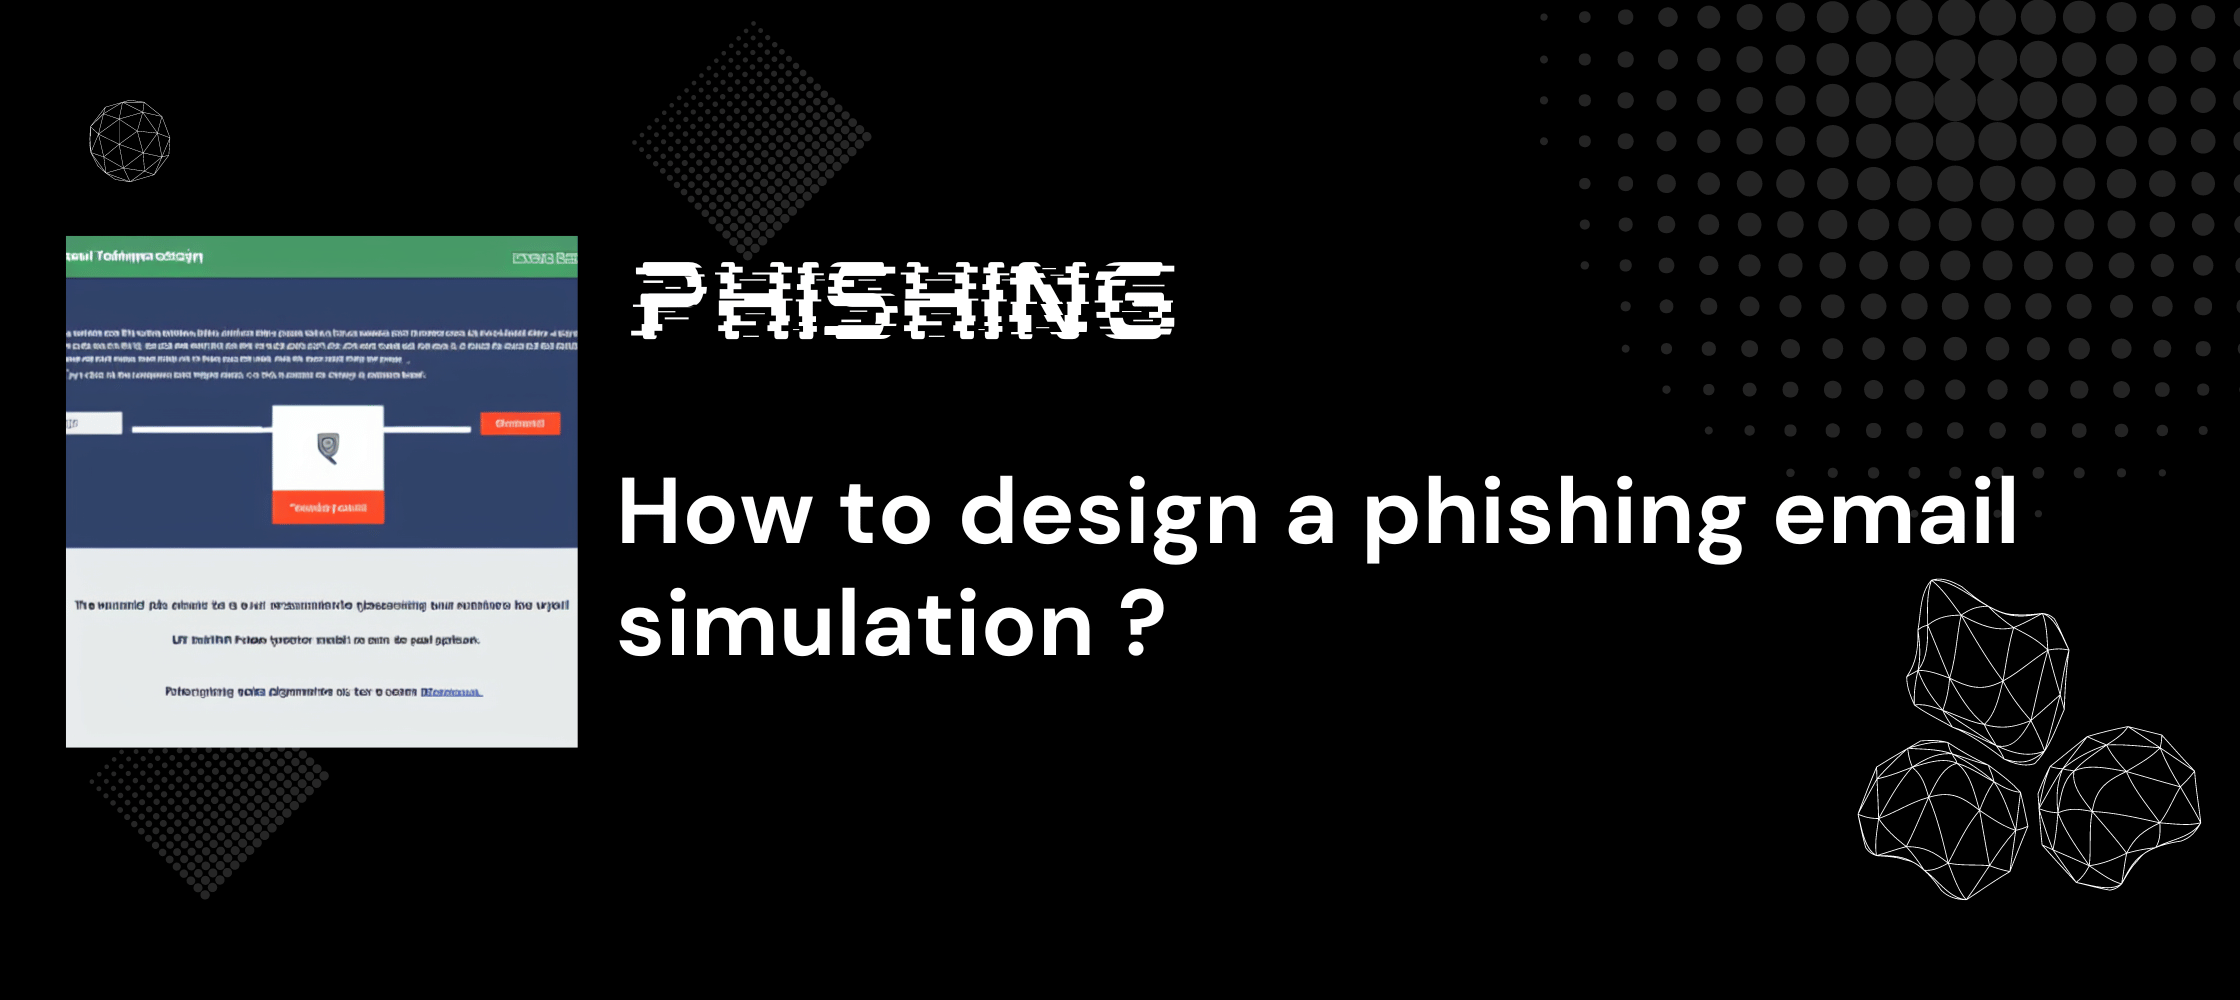 Enhancing Cybersecurity: How to Design a Phishing Email Simulation Campaign and Protect Your Data-2023